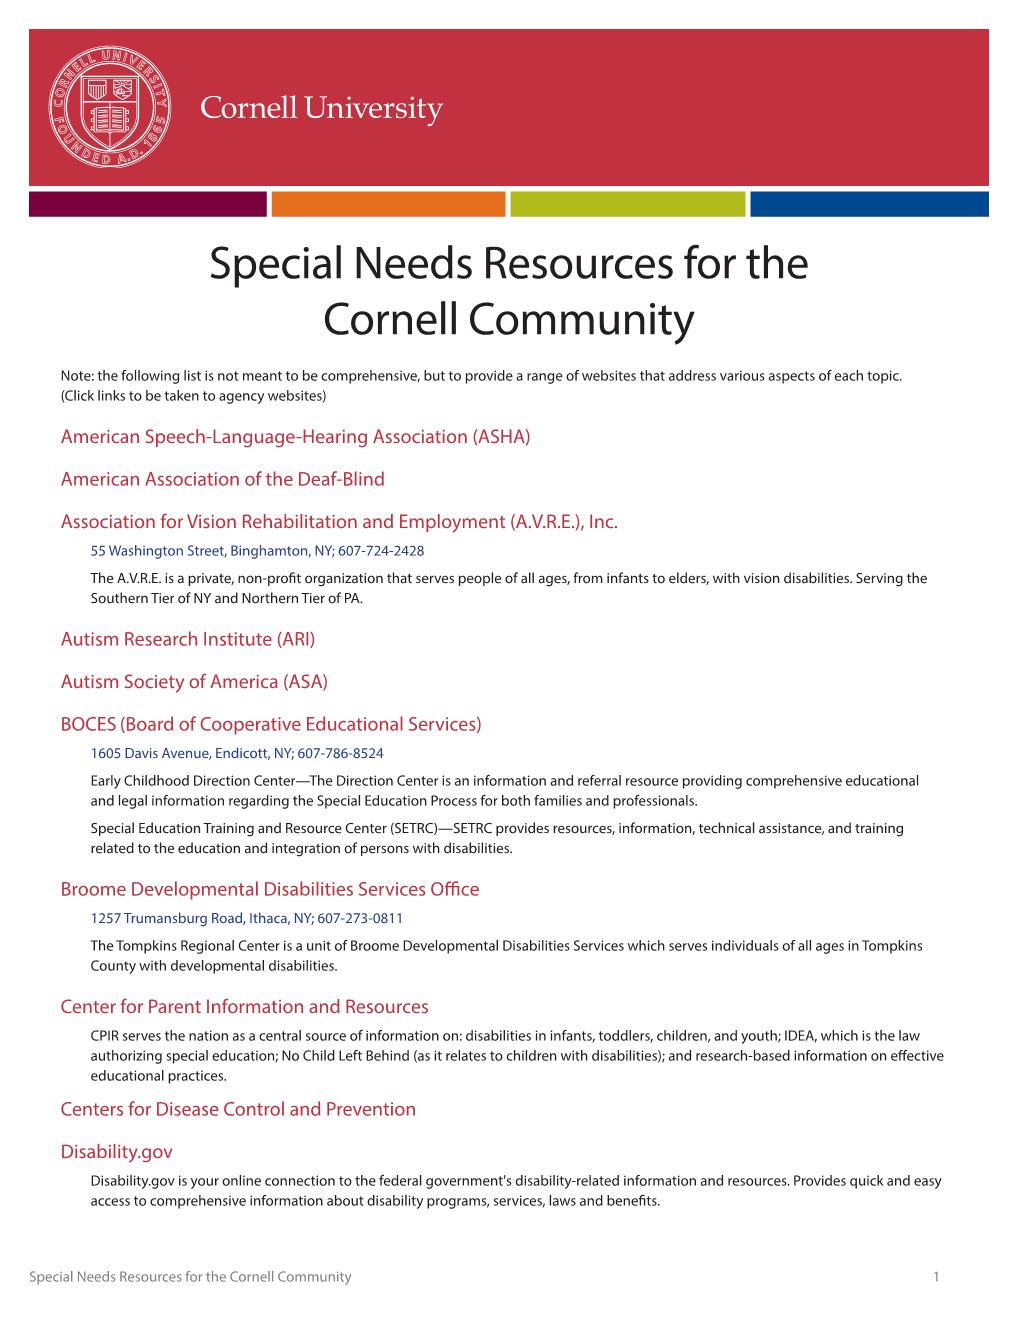 Resources for Children with Special Needs